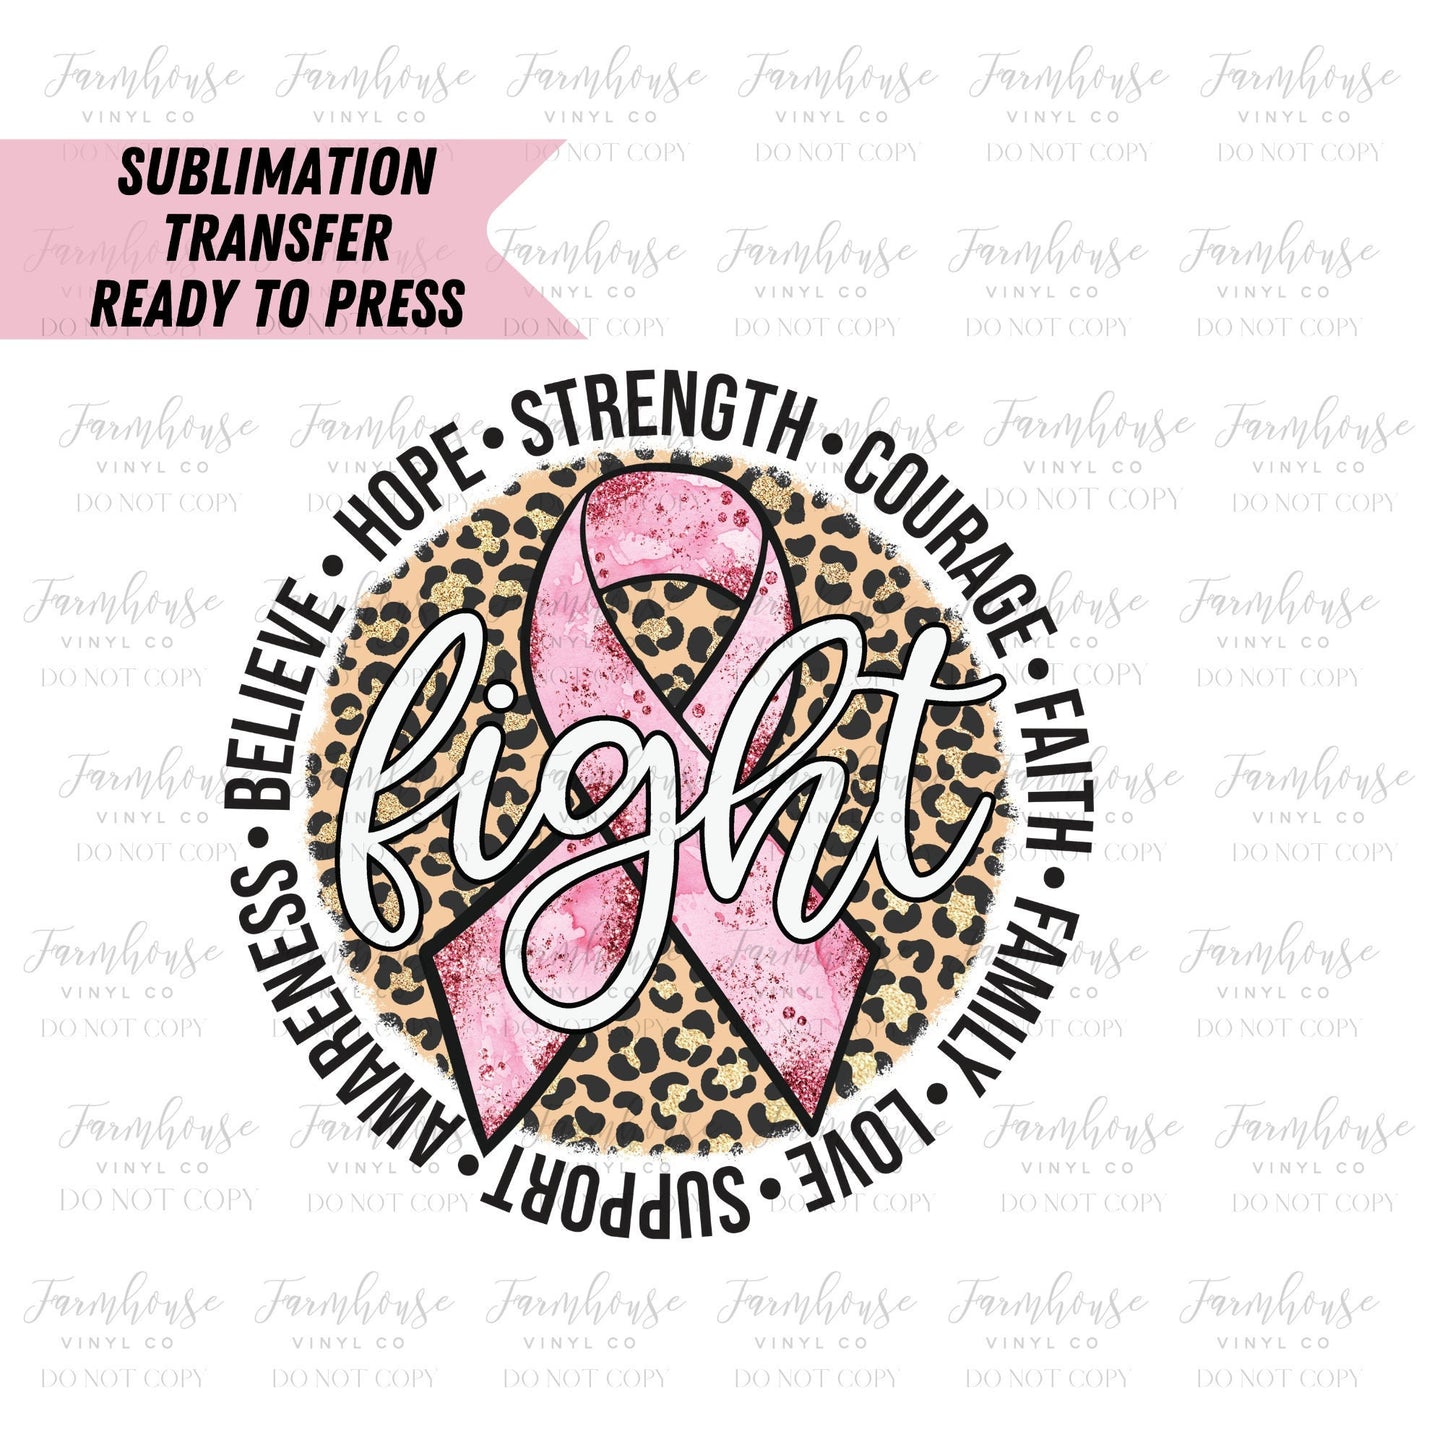 Breast Cancer Awareness Pink Ribbon Ready to Press Sublimation Transfer - Farmhouse Vinyl Co